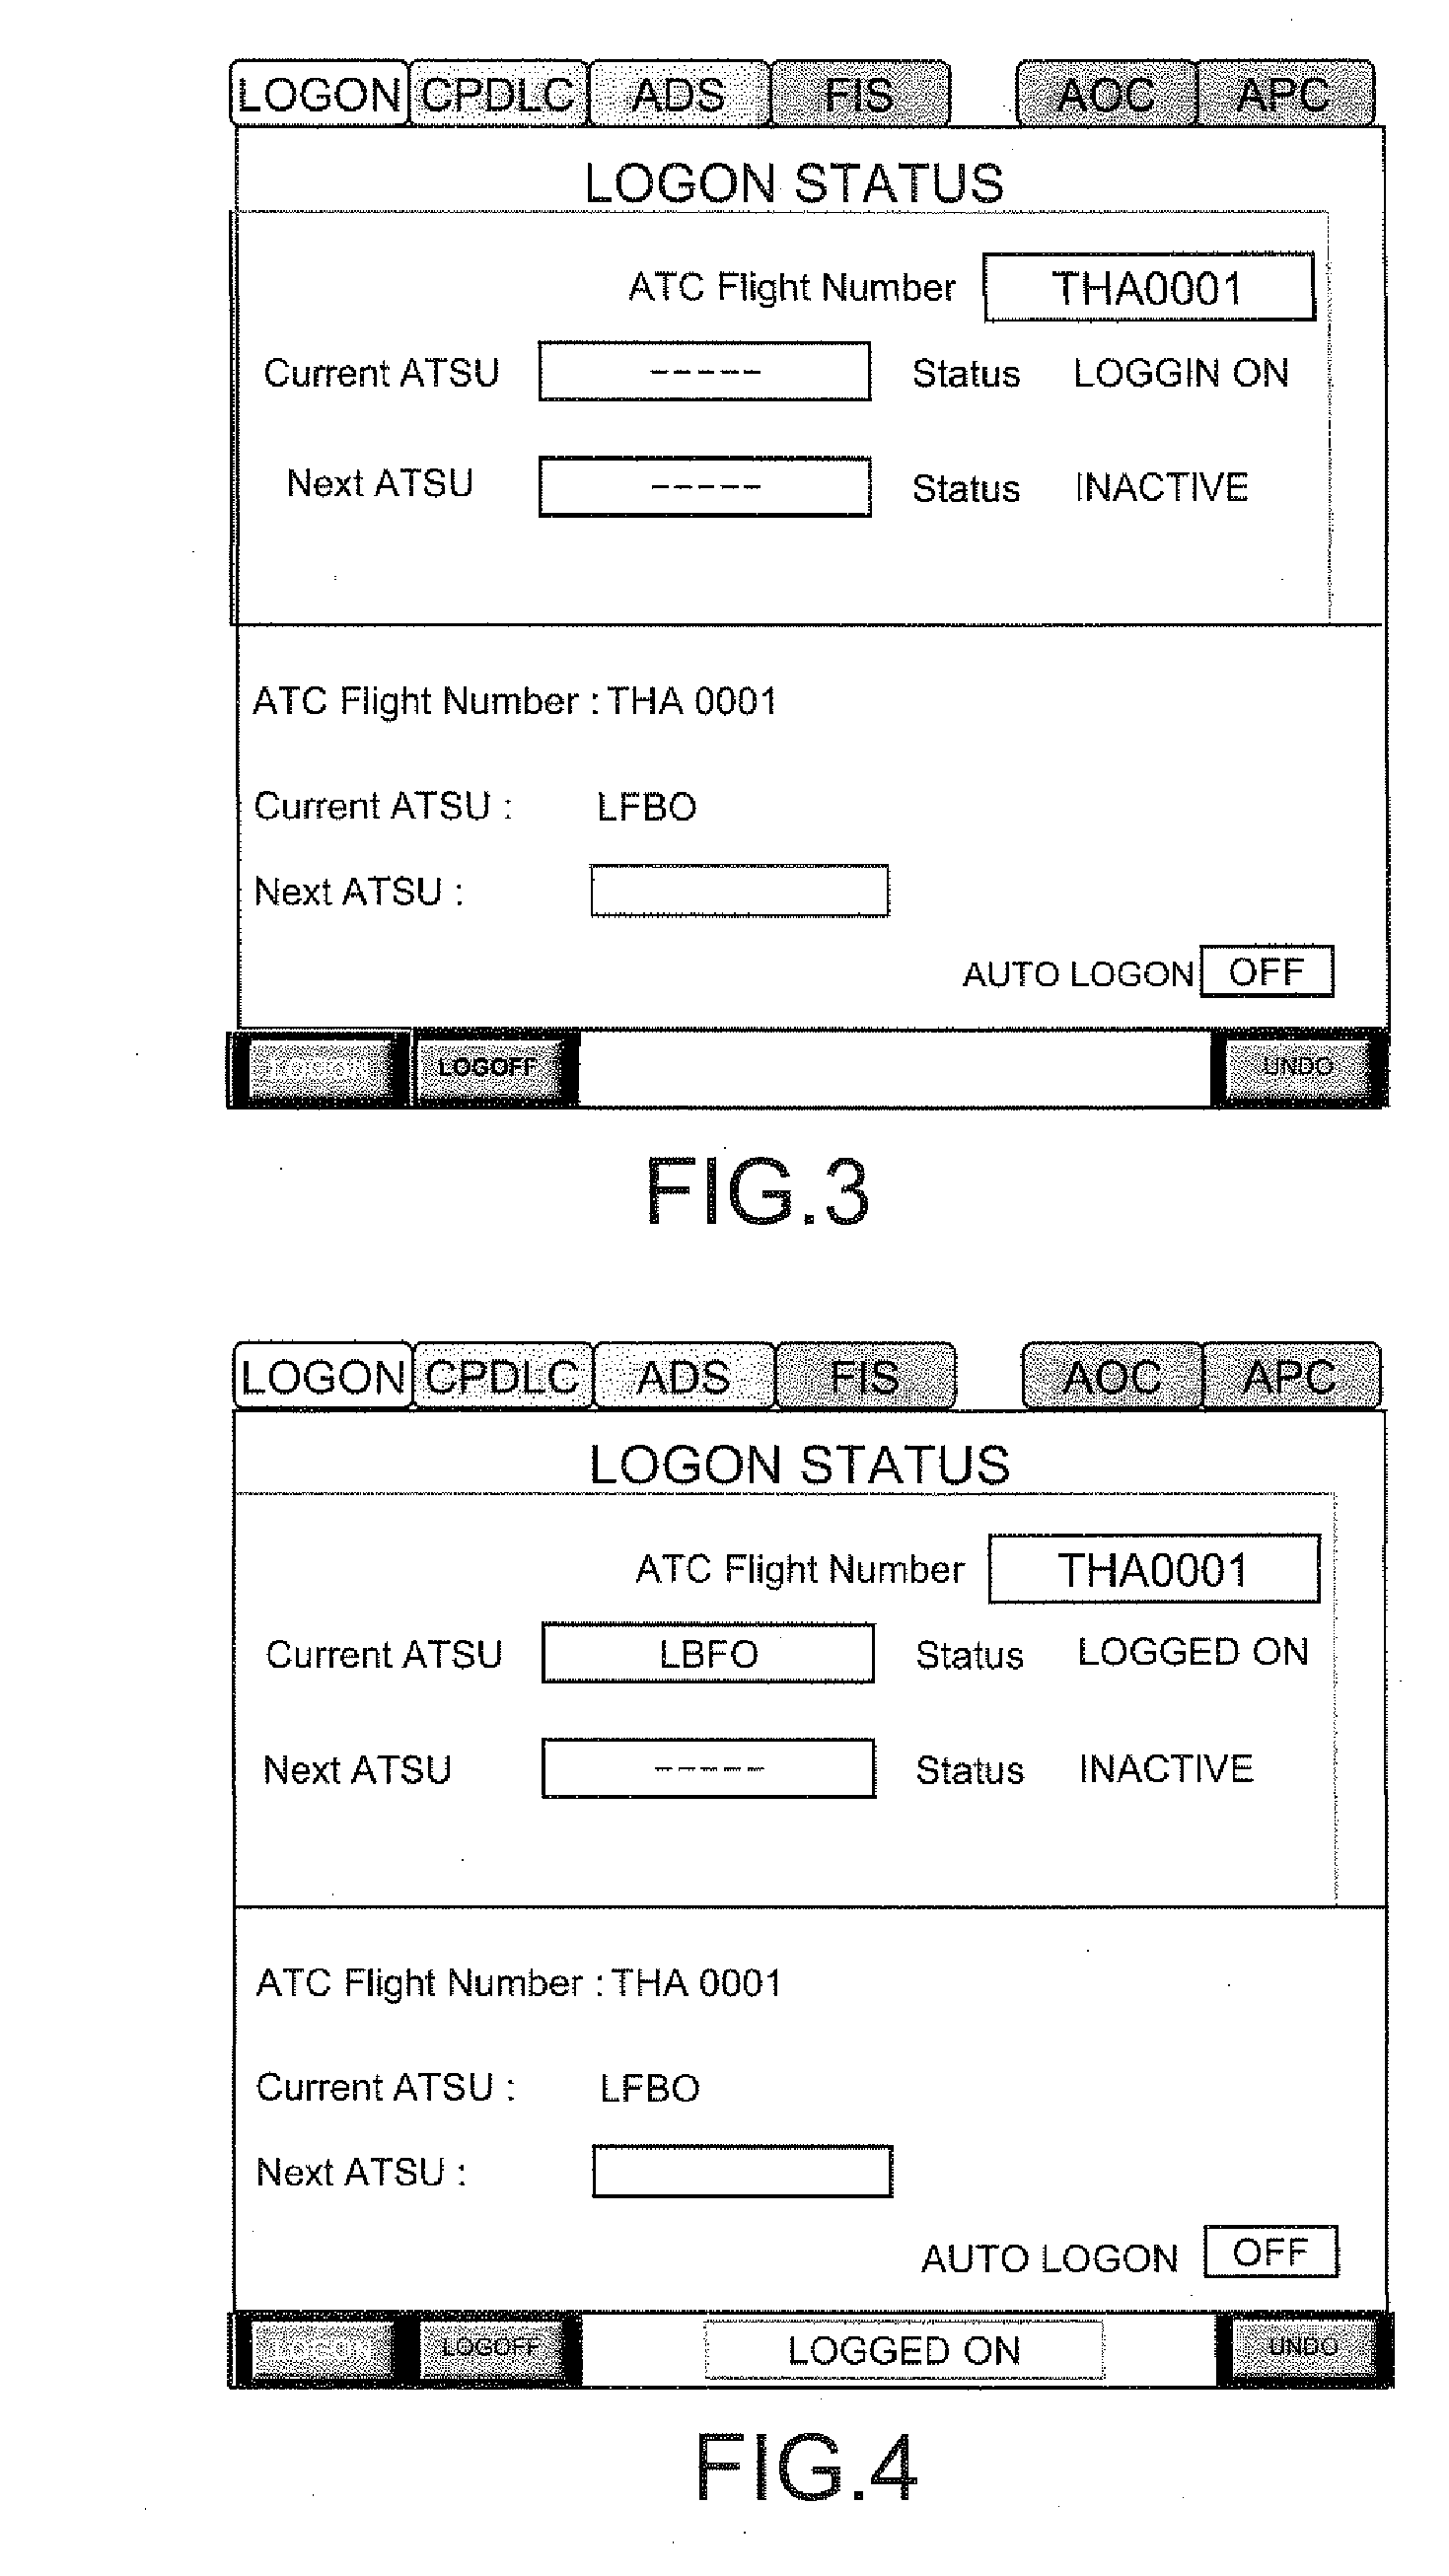 Onboard Device for Managing Data Exchanged by an Aircraft with the Ground or Other Aircraft